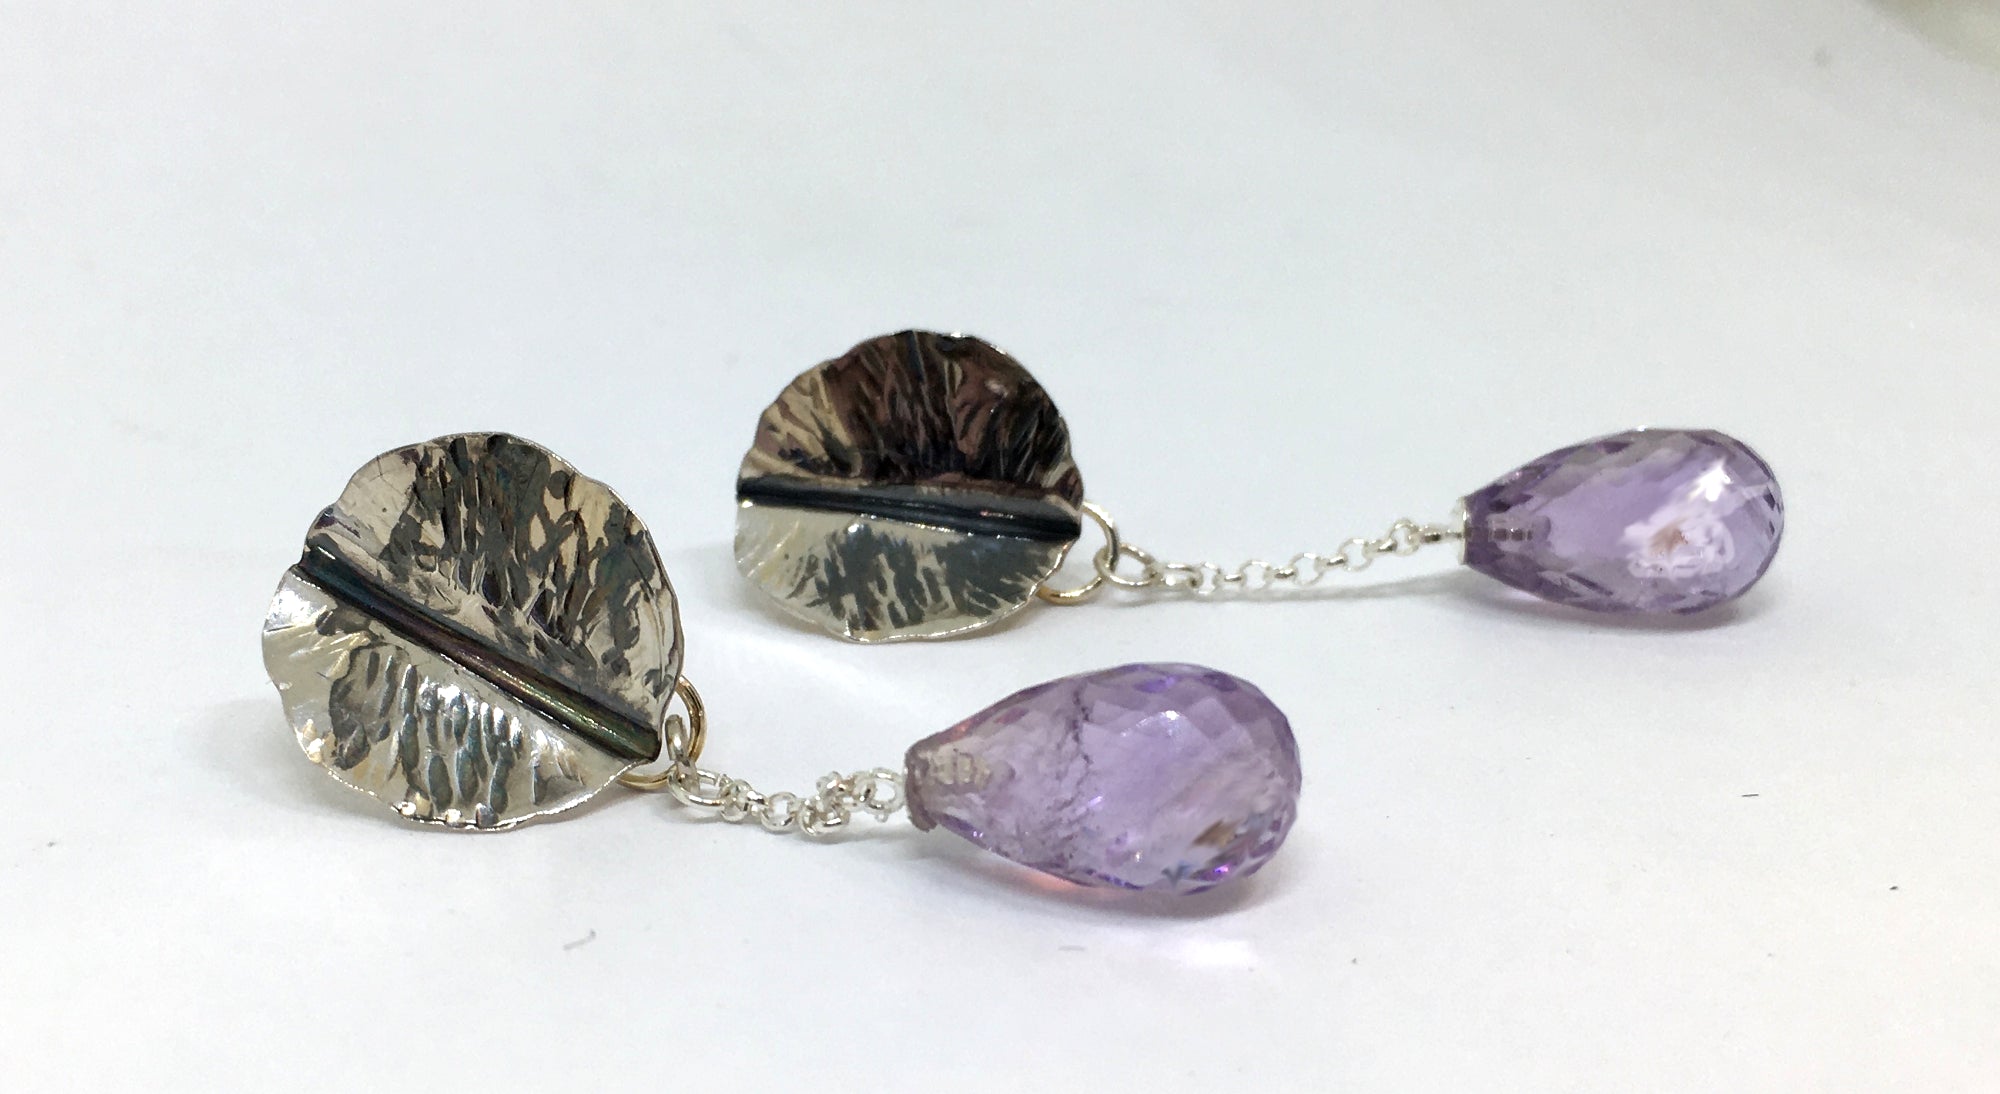 Hand Forged Leaf Earrings with Amethyst Drops in Sterling Silver